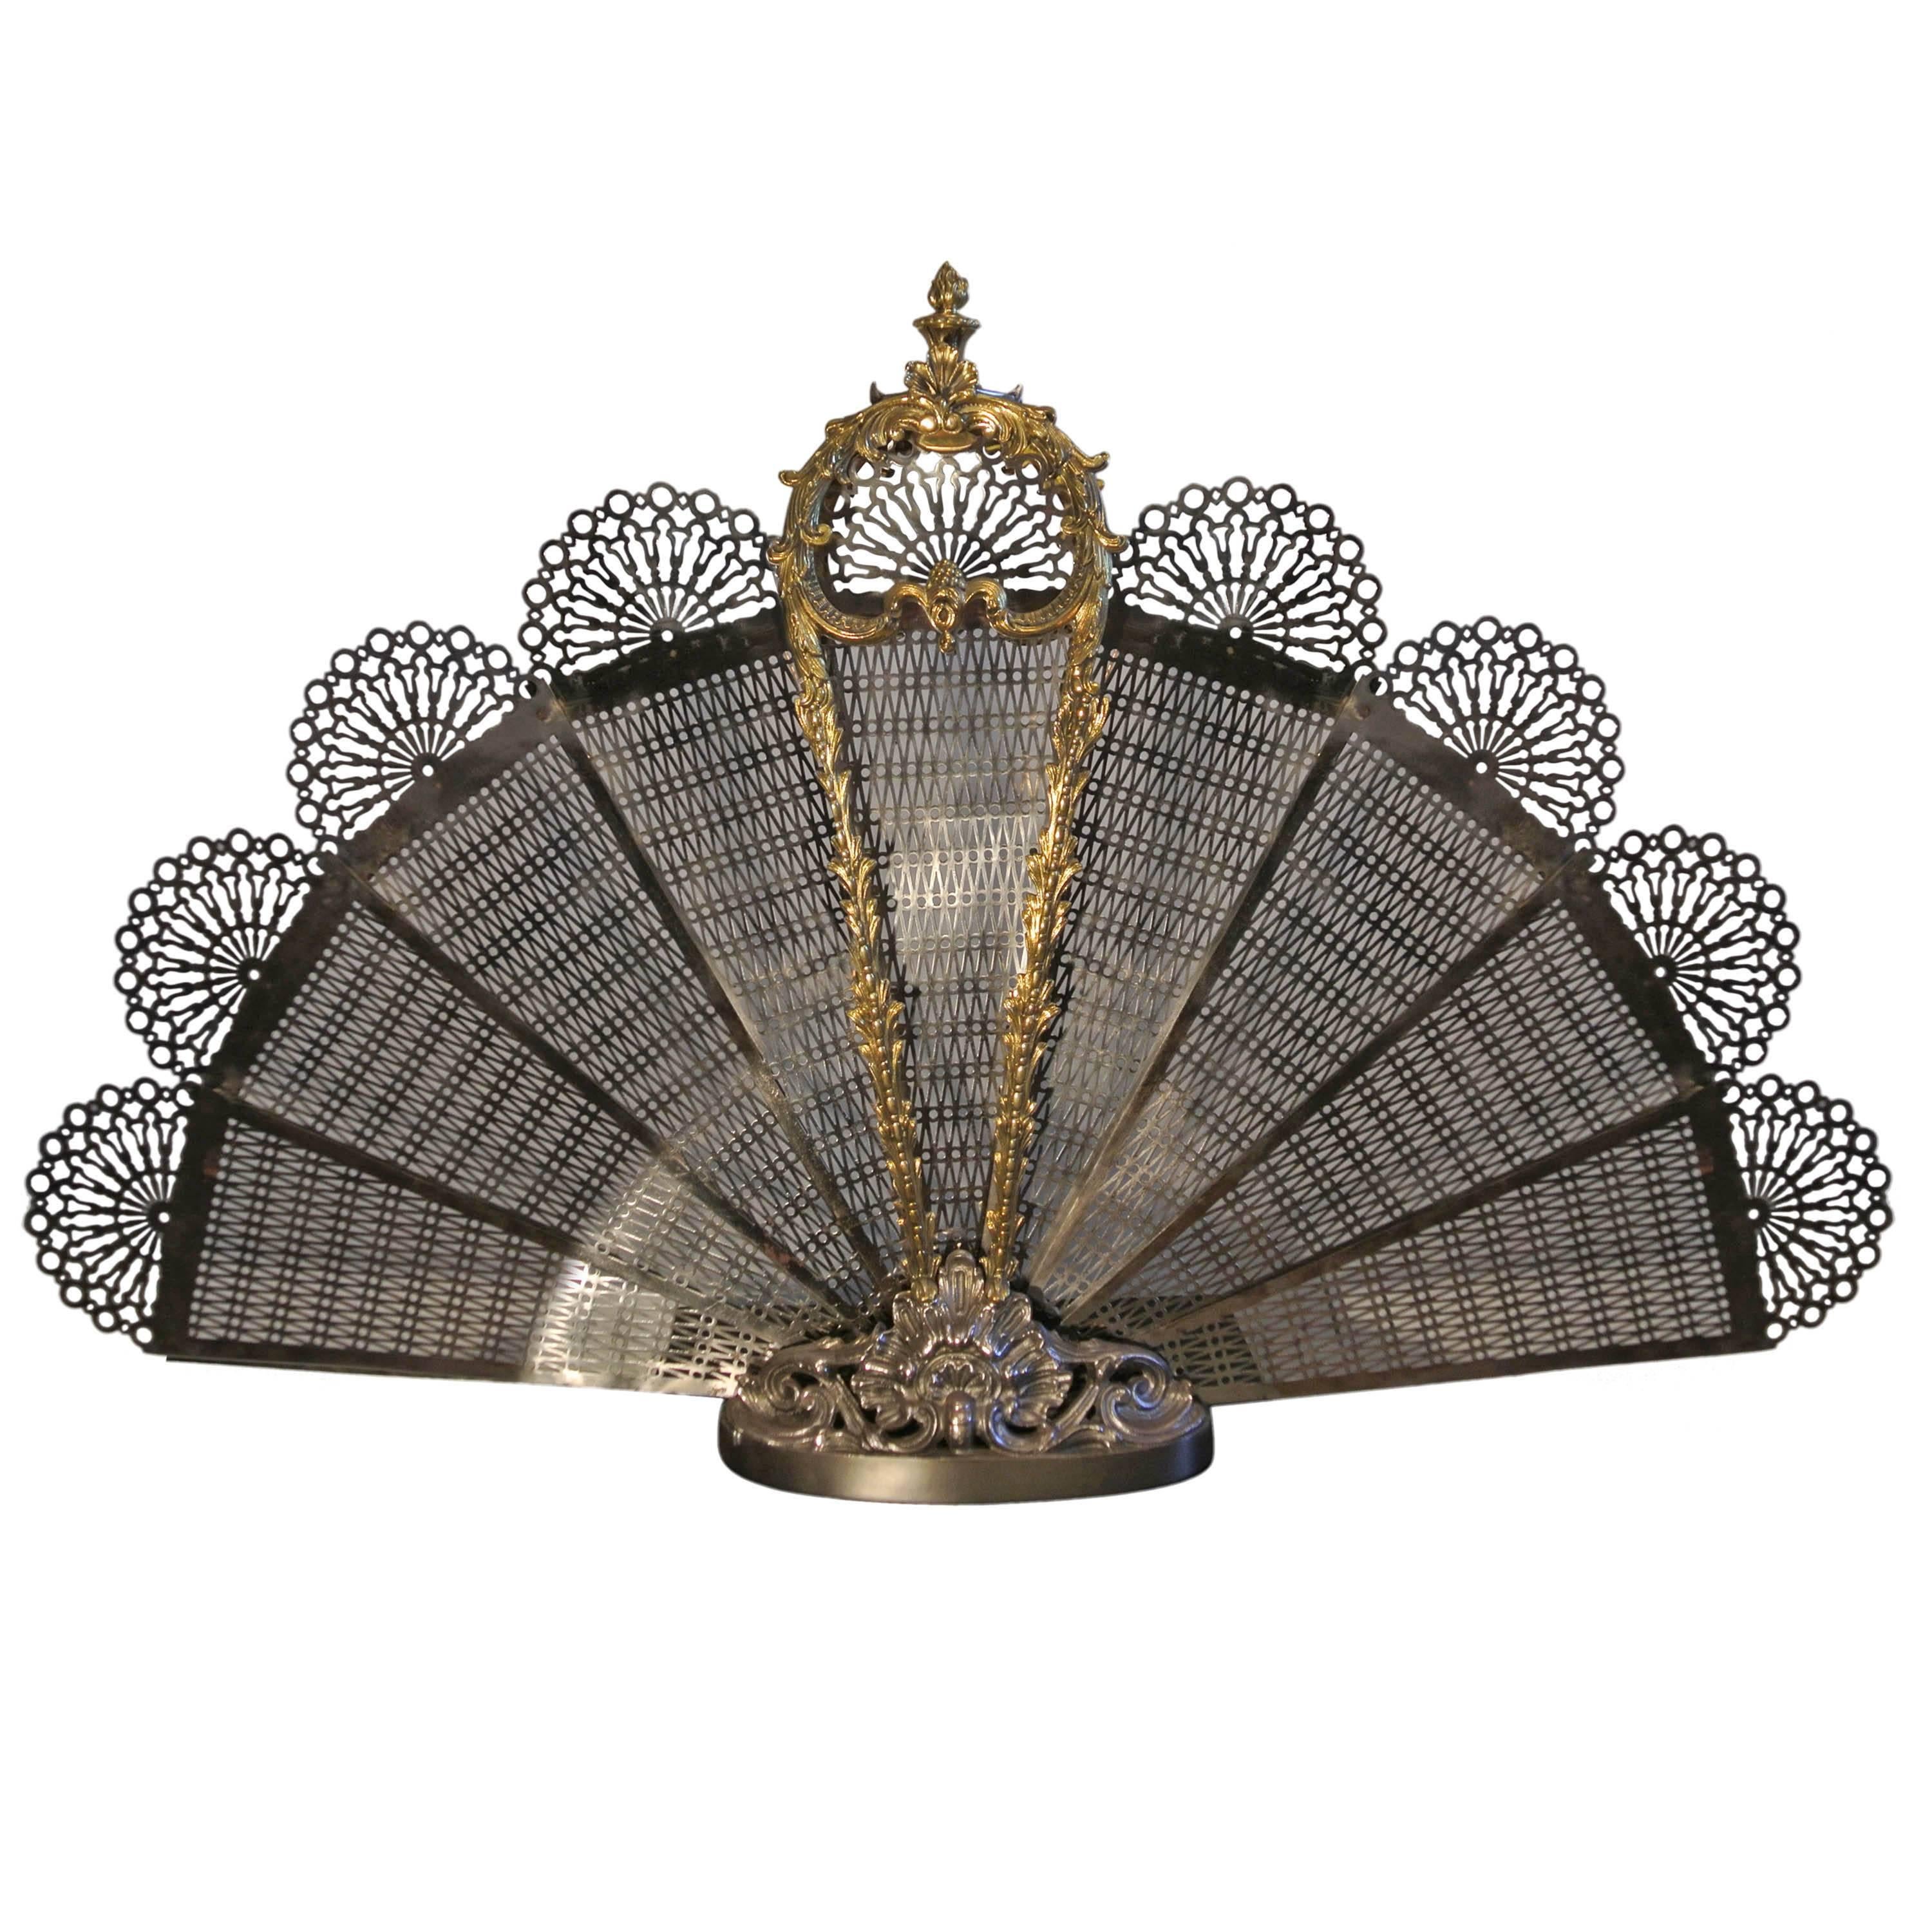 Exceptional Bronze and Iron Fire Place Screen in a Peacock Fan Design